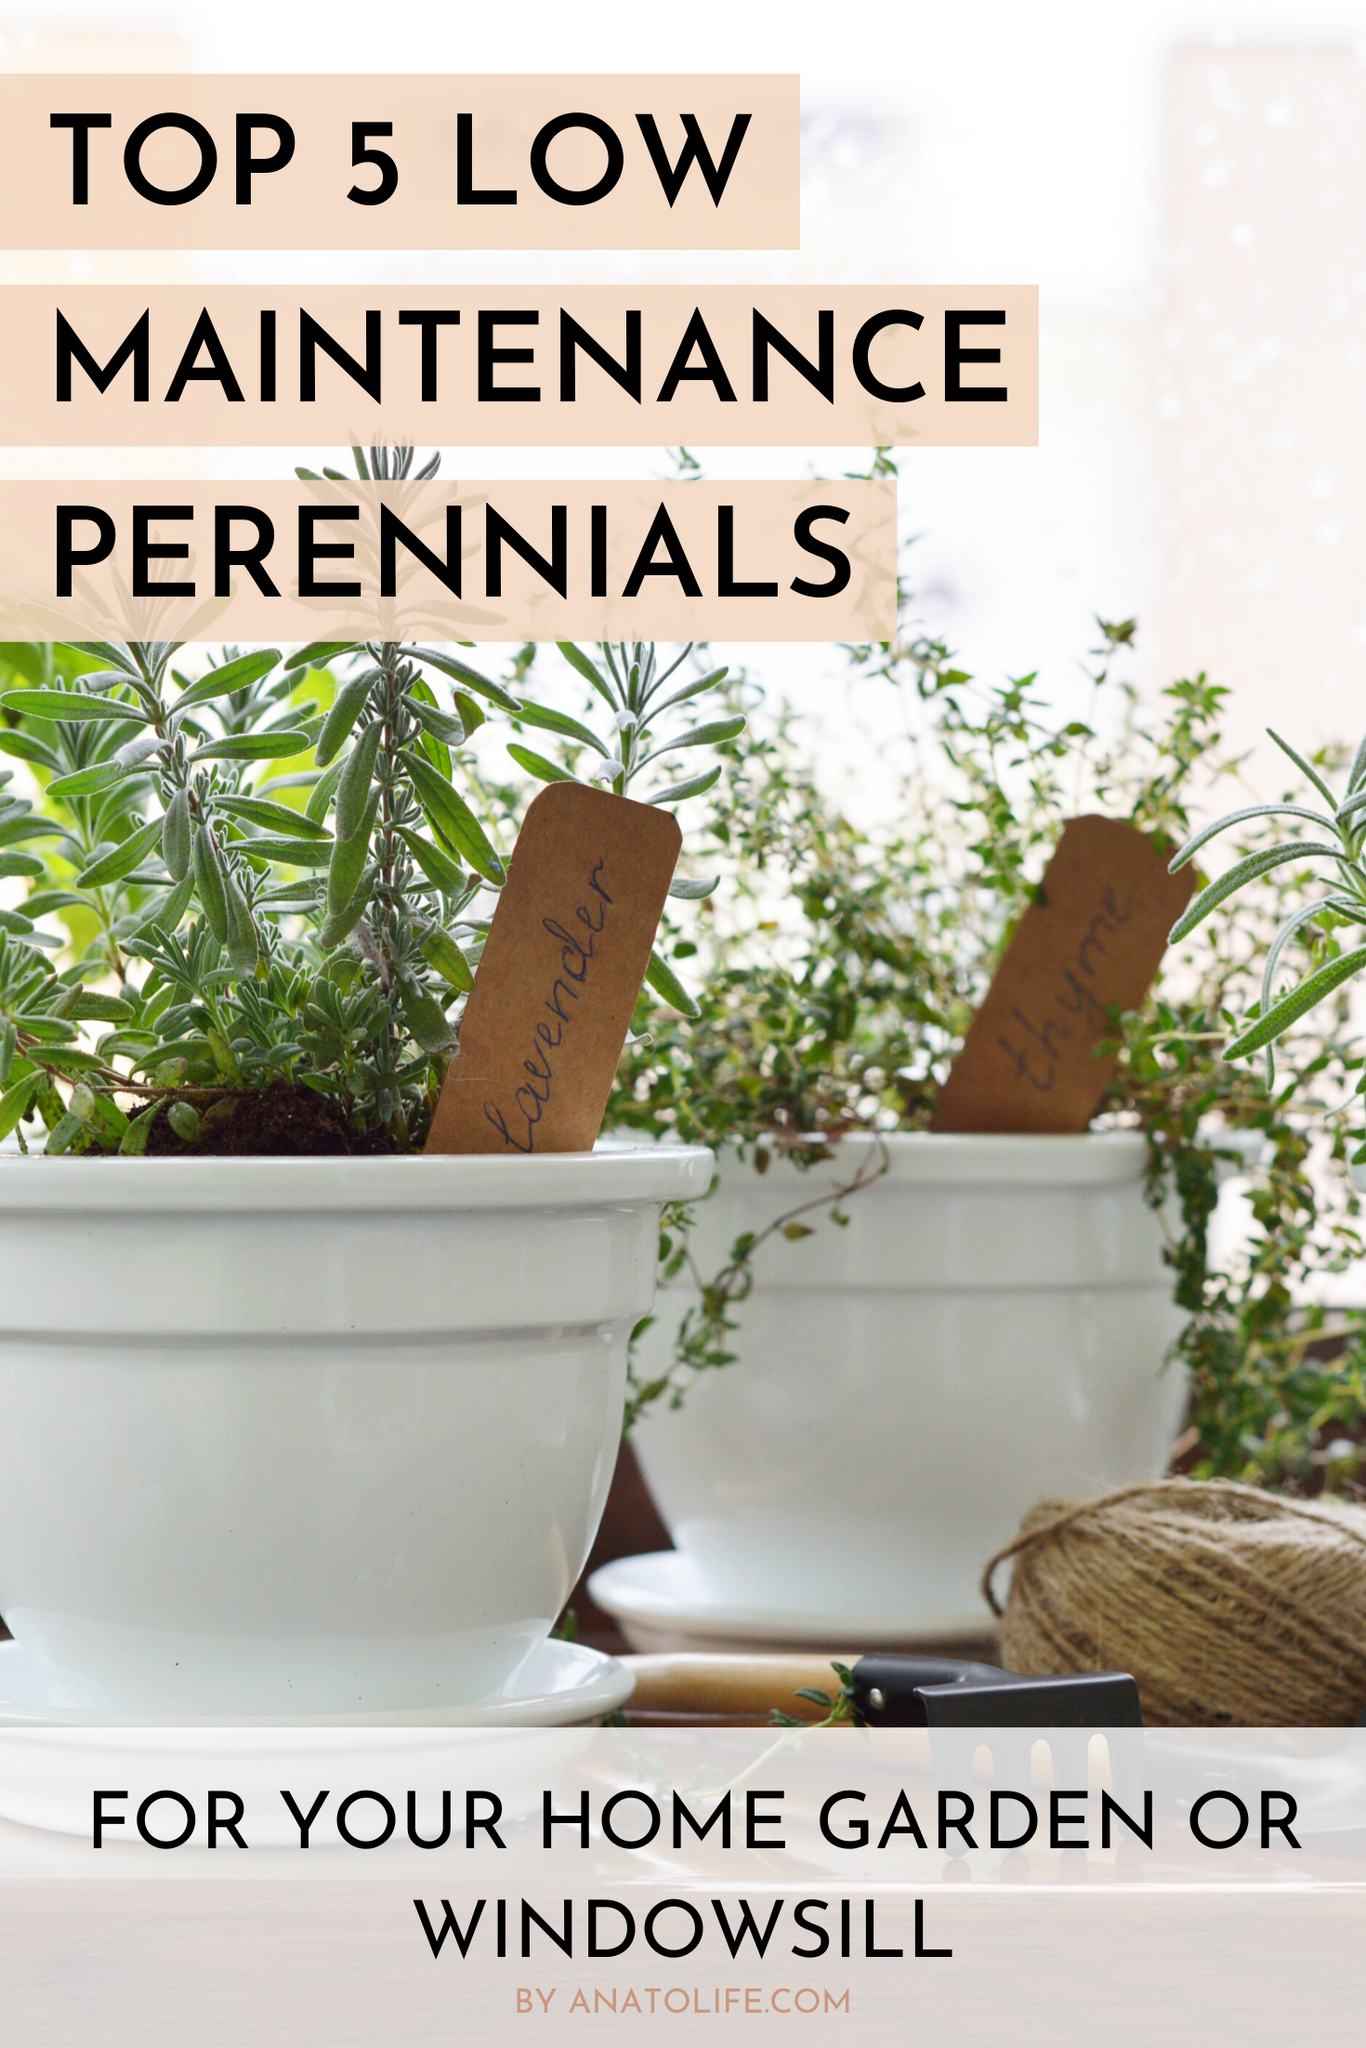 Top 5 Low Maintenance Perennials For Your Home Garden or Windowsill by Anato